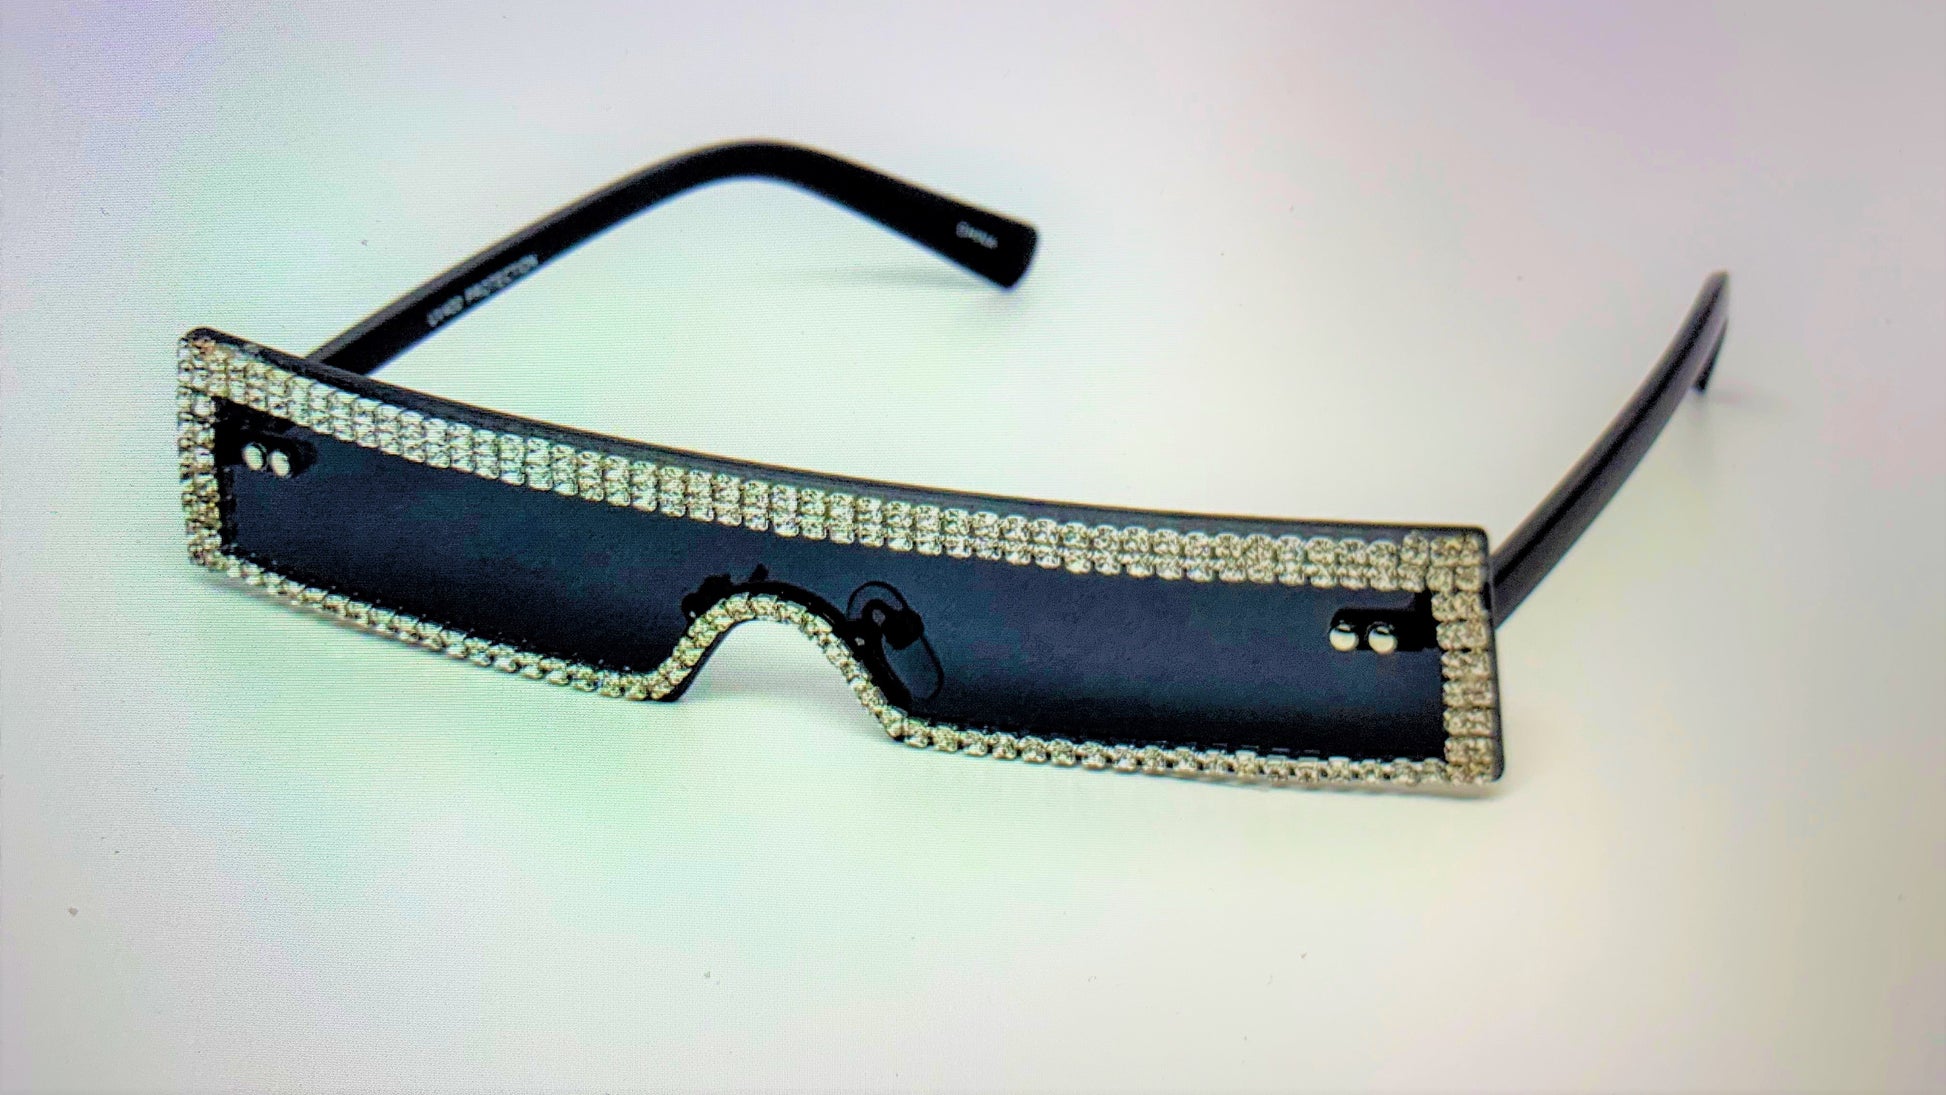 Wait a minute, don't forget the high fashion rhinestone slim color sunglasses.  The sunglasses has a thin high fashion cyber retro rectangular design with rhinestones infused borders and flexible acrylic frames.  They're screaming, SOPHISTICATED LADY! 